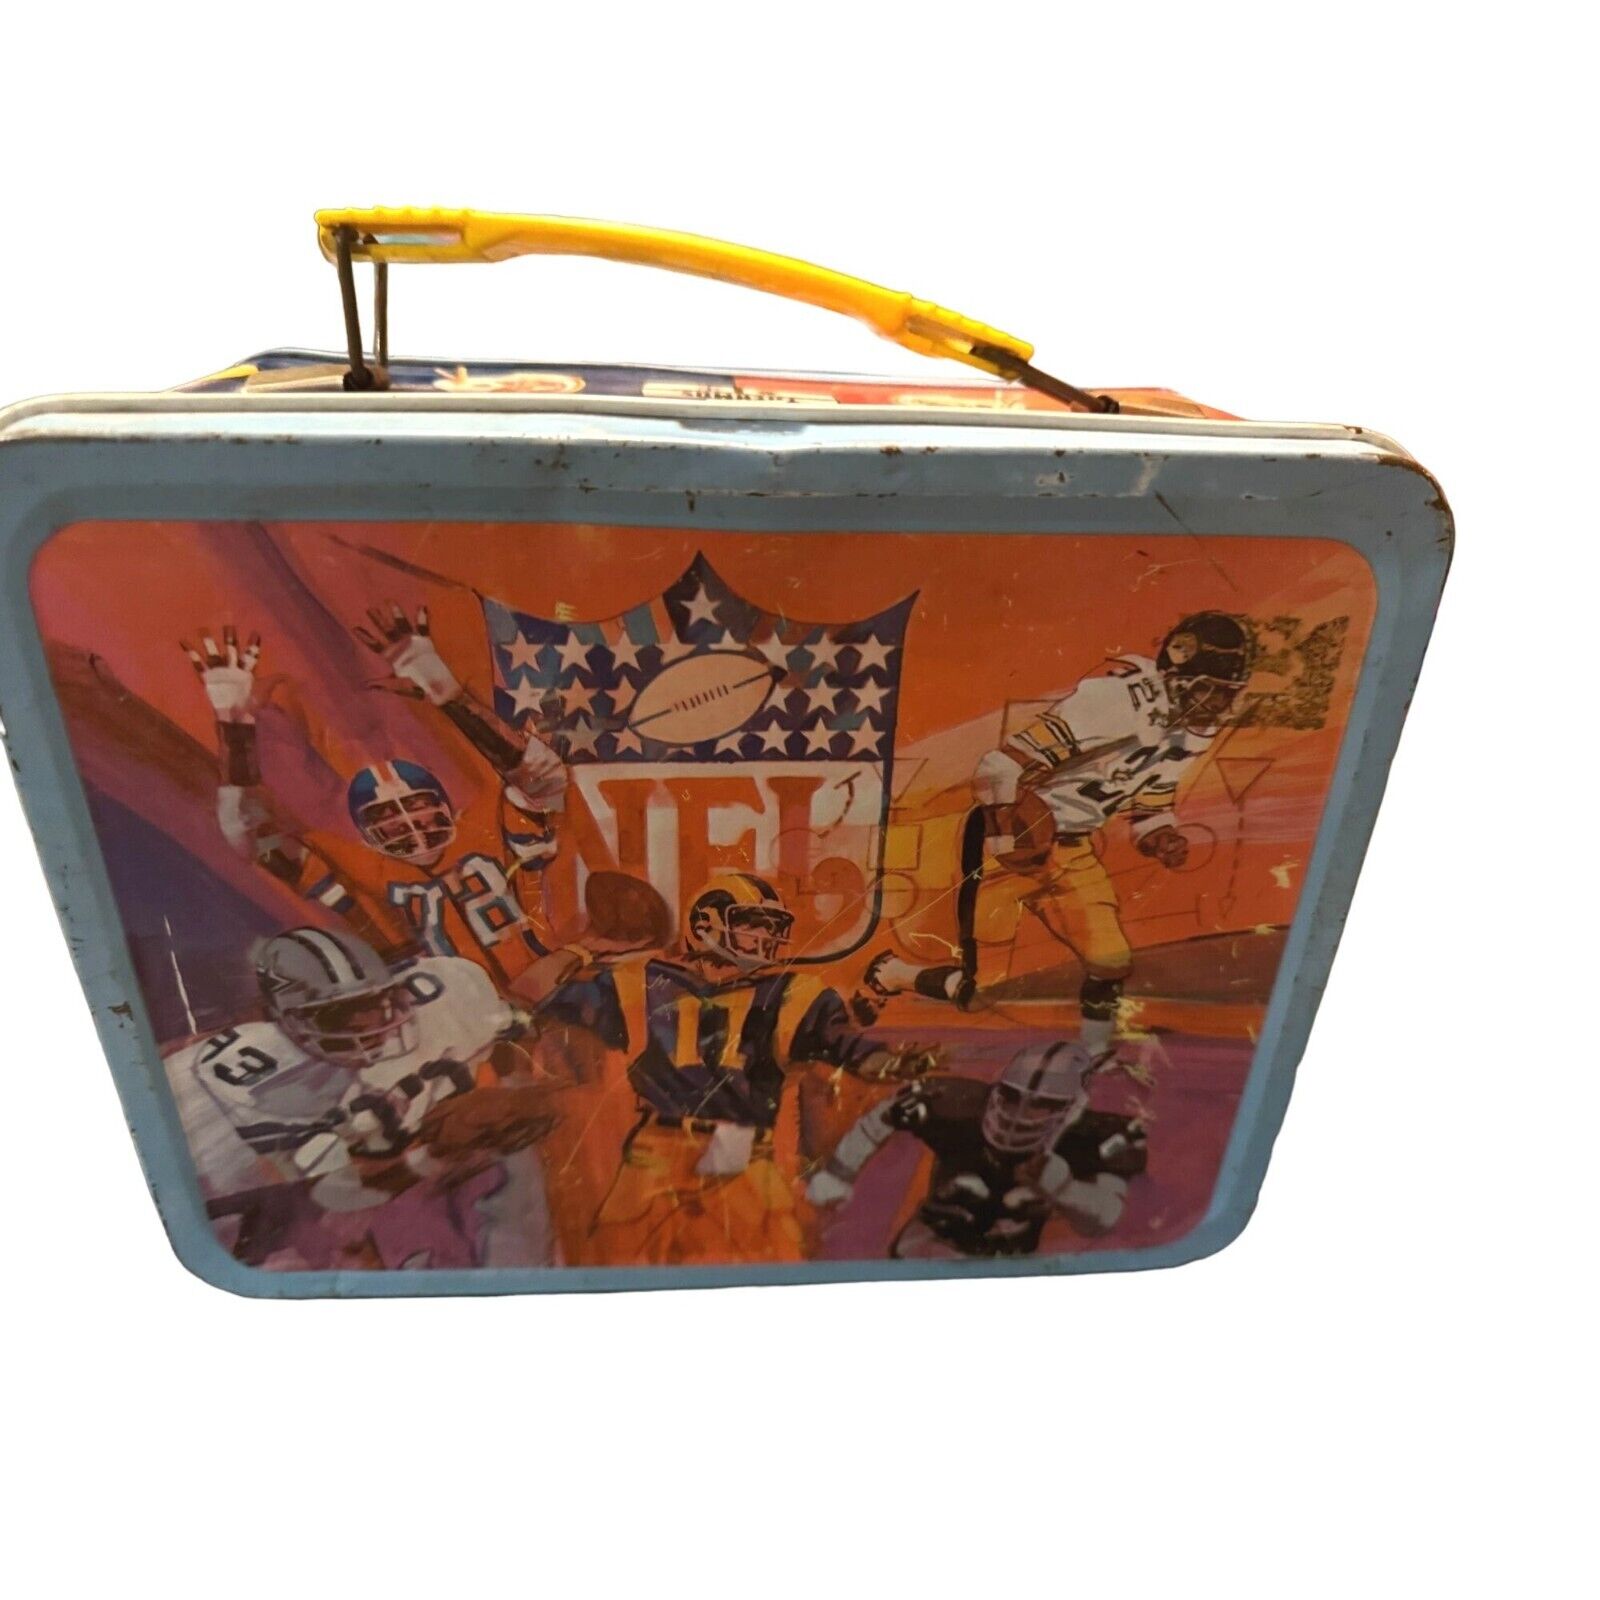 Vintage 1978 NFL Lunch Box. No Thermos- As Found- Think Superbowl Party